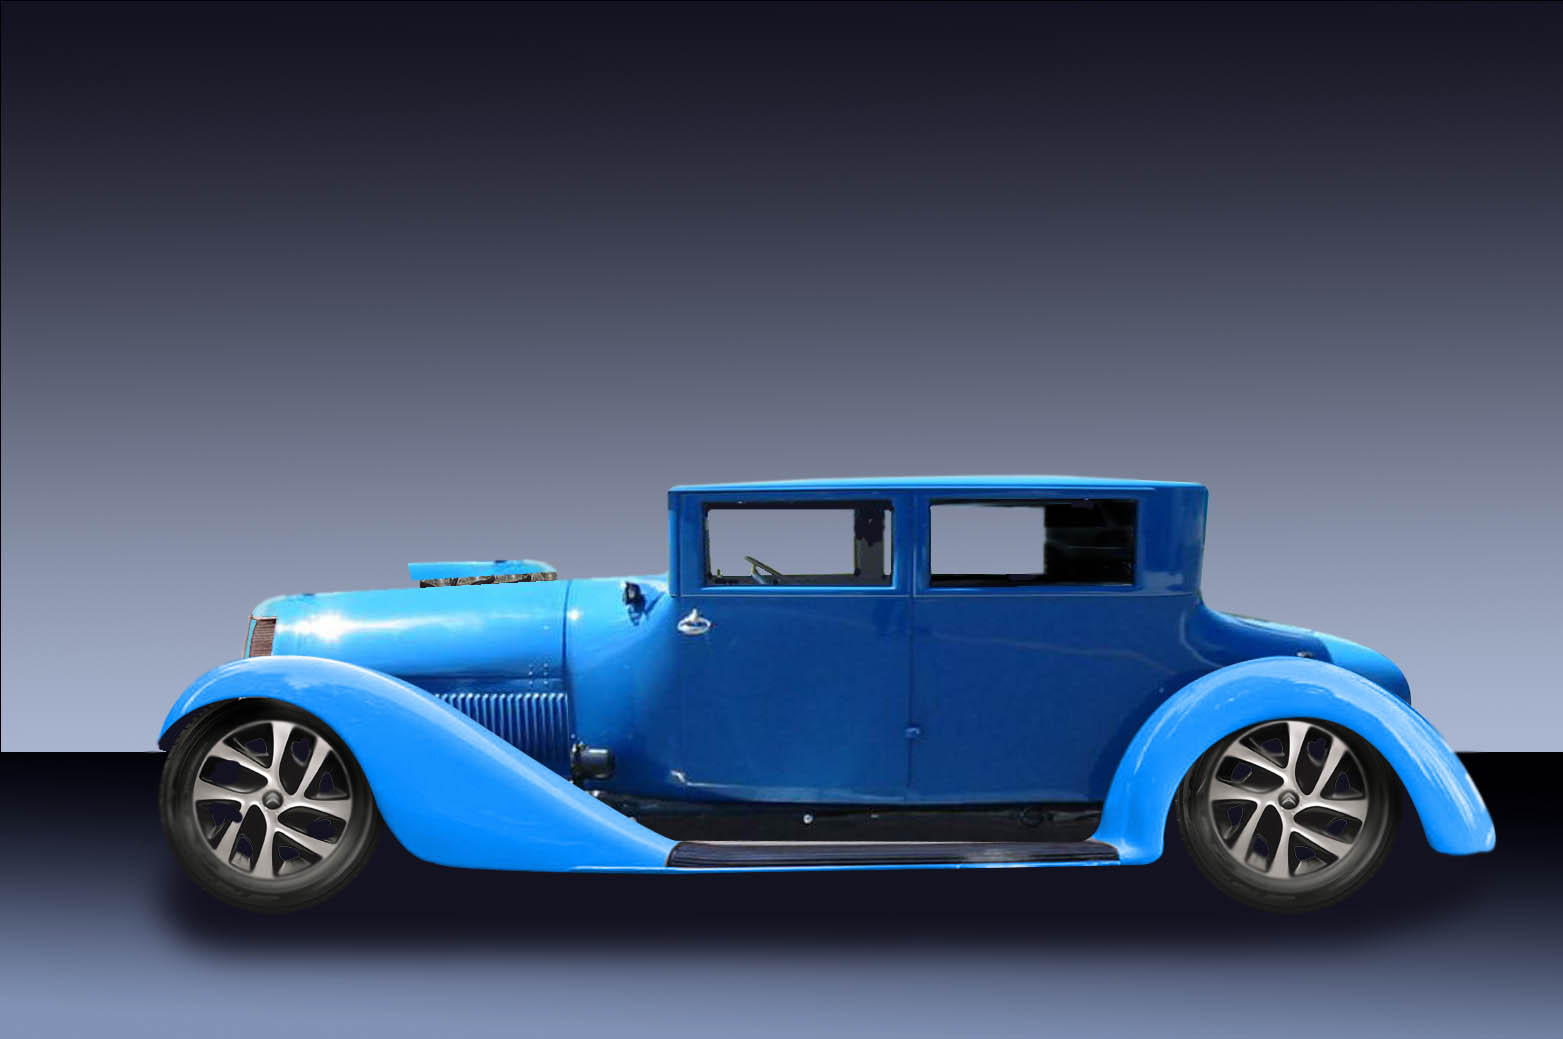 an old blue car is seen in this image